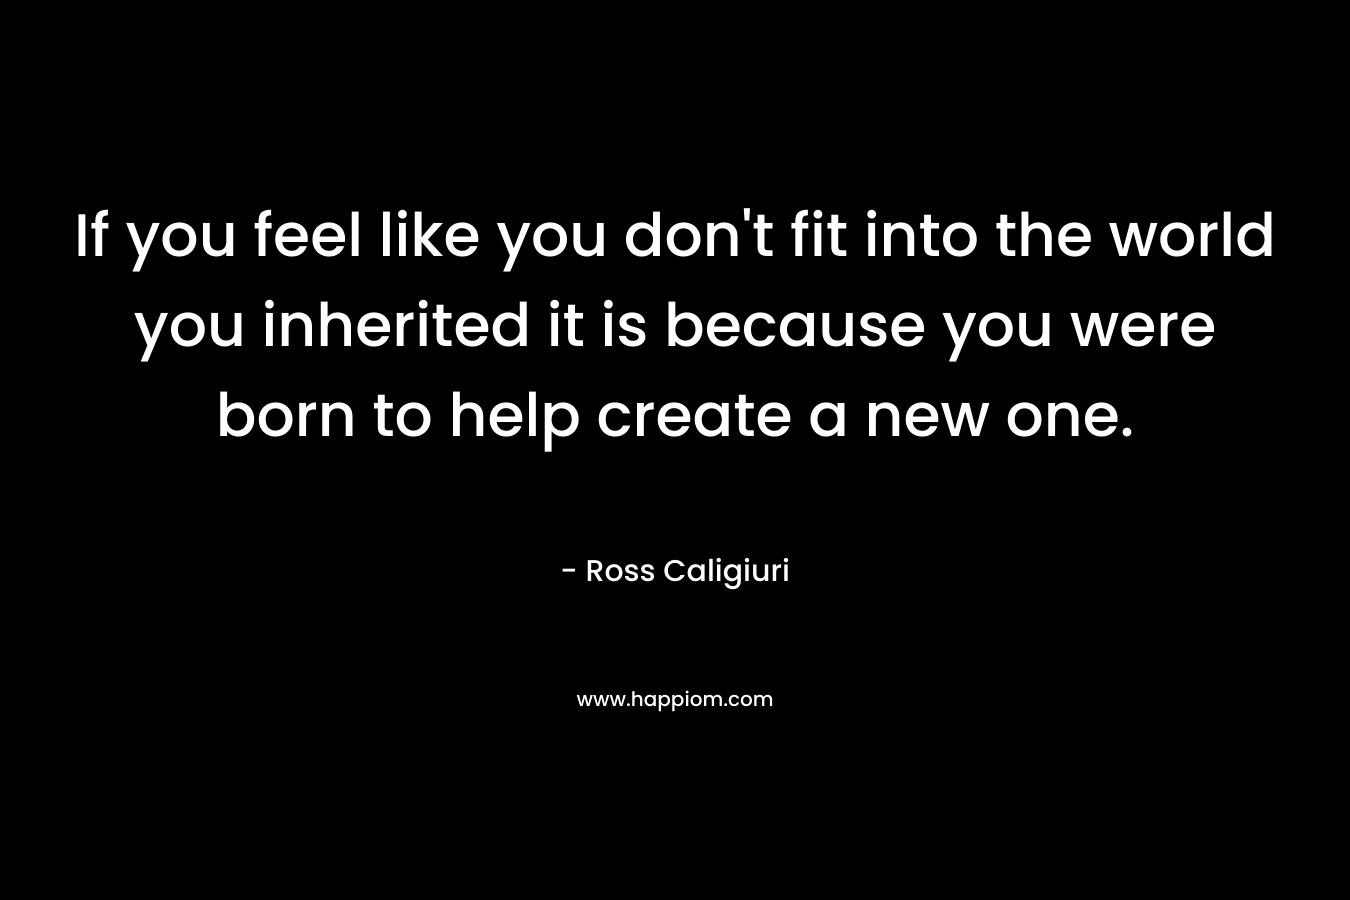 If you feel like you don't fit into the world you inherited it is because you were born to help create a new one.